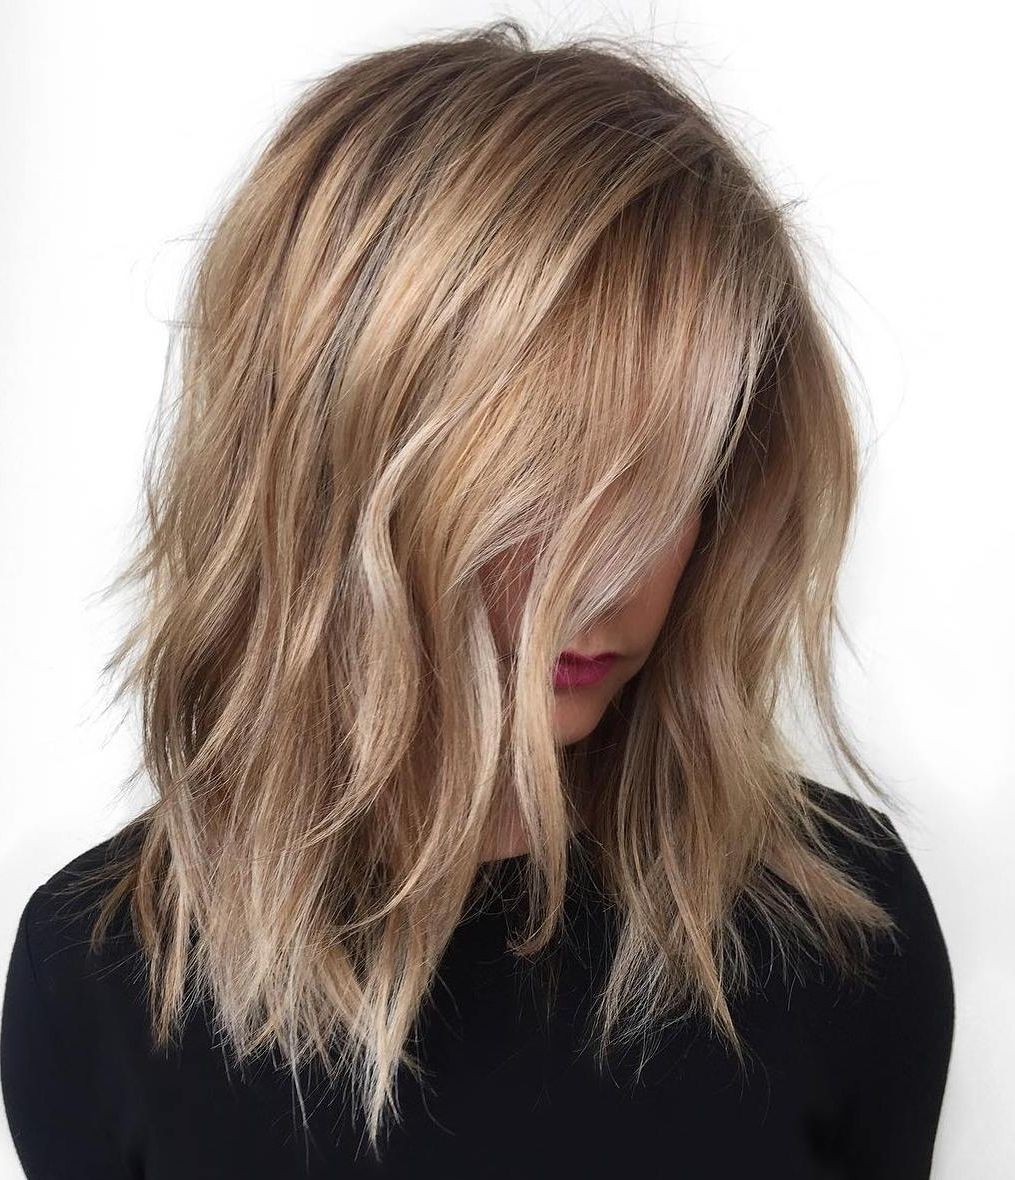 2018 Loosely Coiled Tortoiseshell Blonde Hairstyles Intended For 40 Styles With Medium Blonde Hair For Major Inspiration (View 1 of 20)